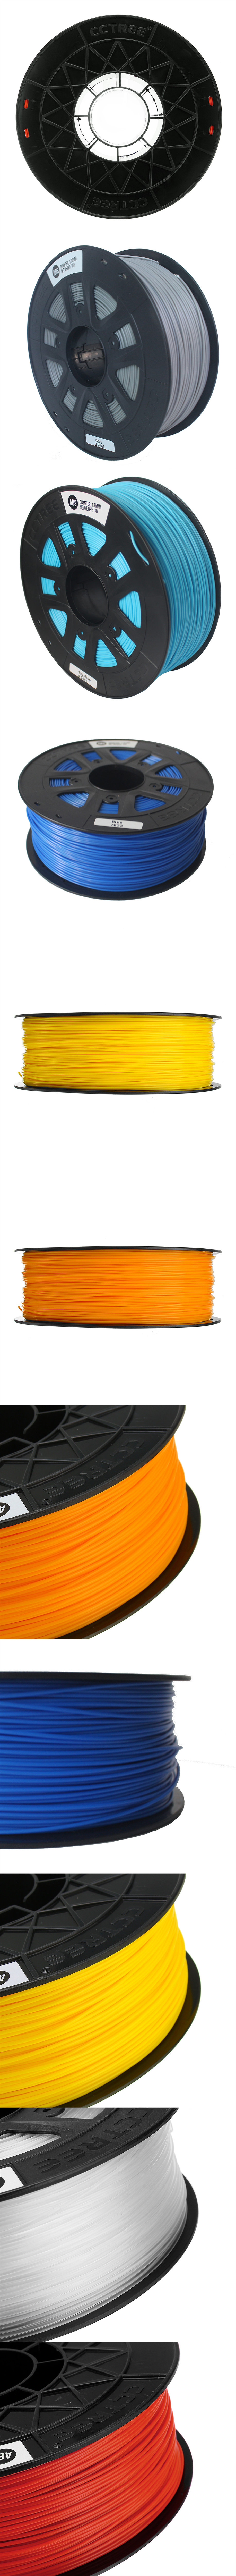 CCTREE® 1KG/Roll 1.75mm Many Colors ABS Filament for Crealilty/TEVO/Anet 3D Printer 17